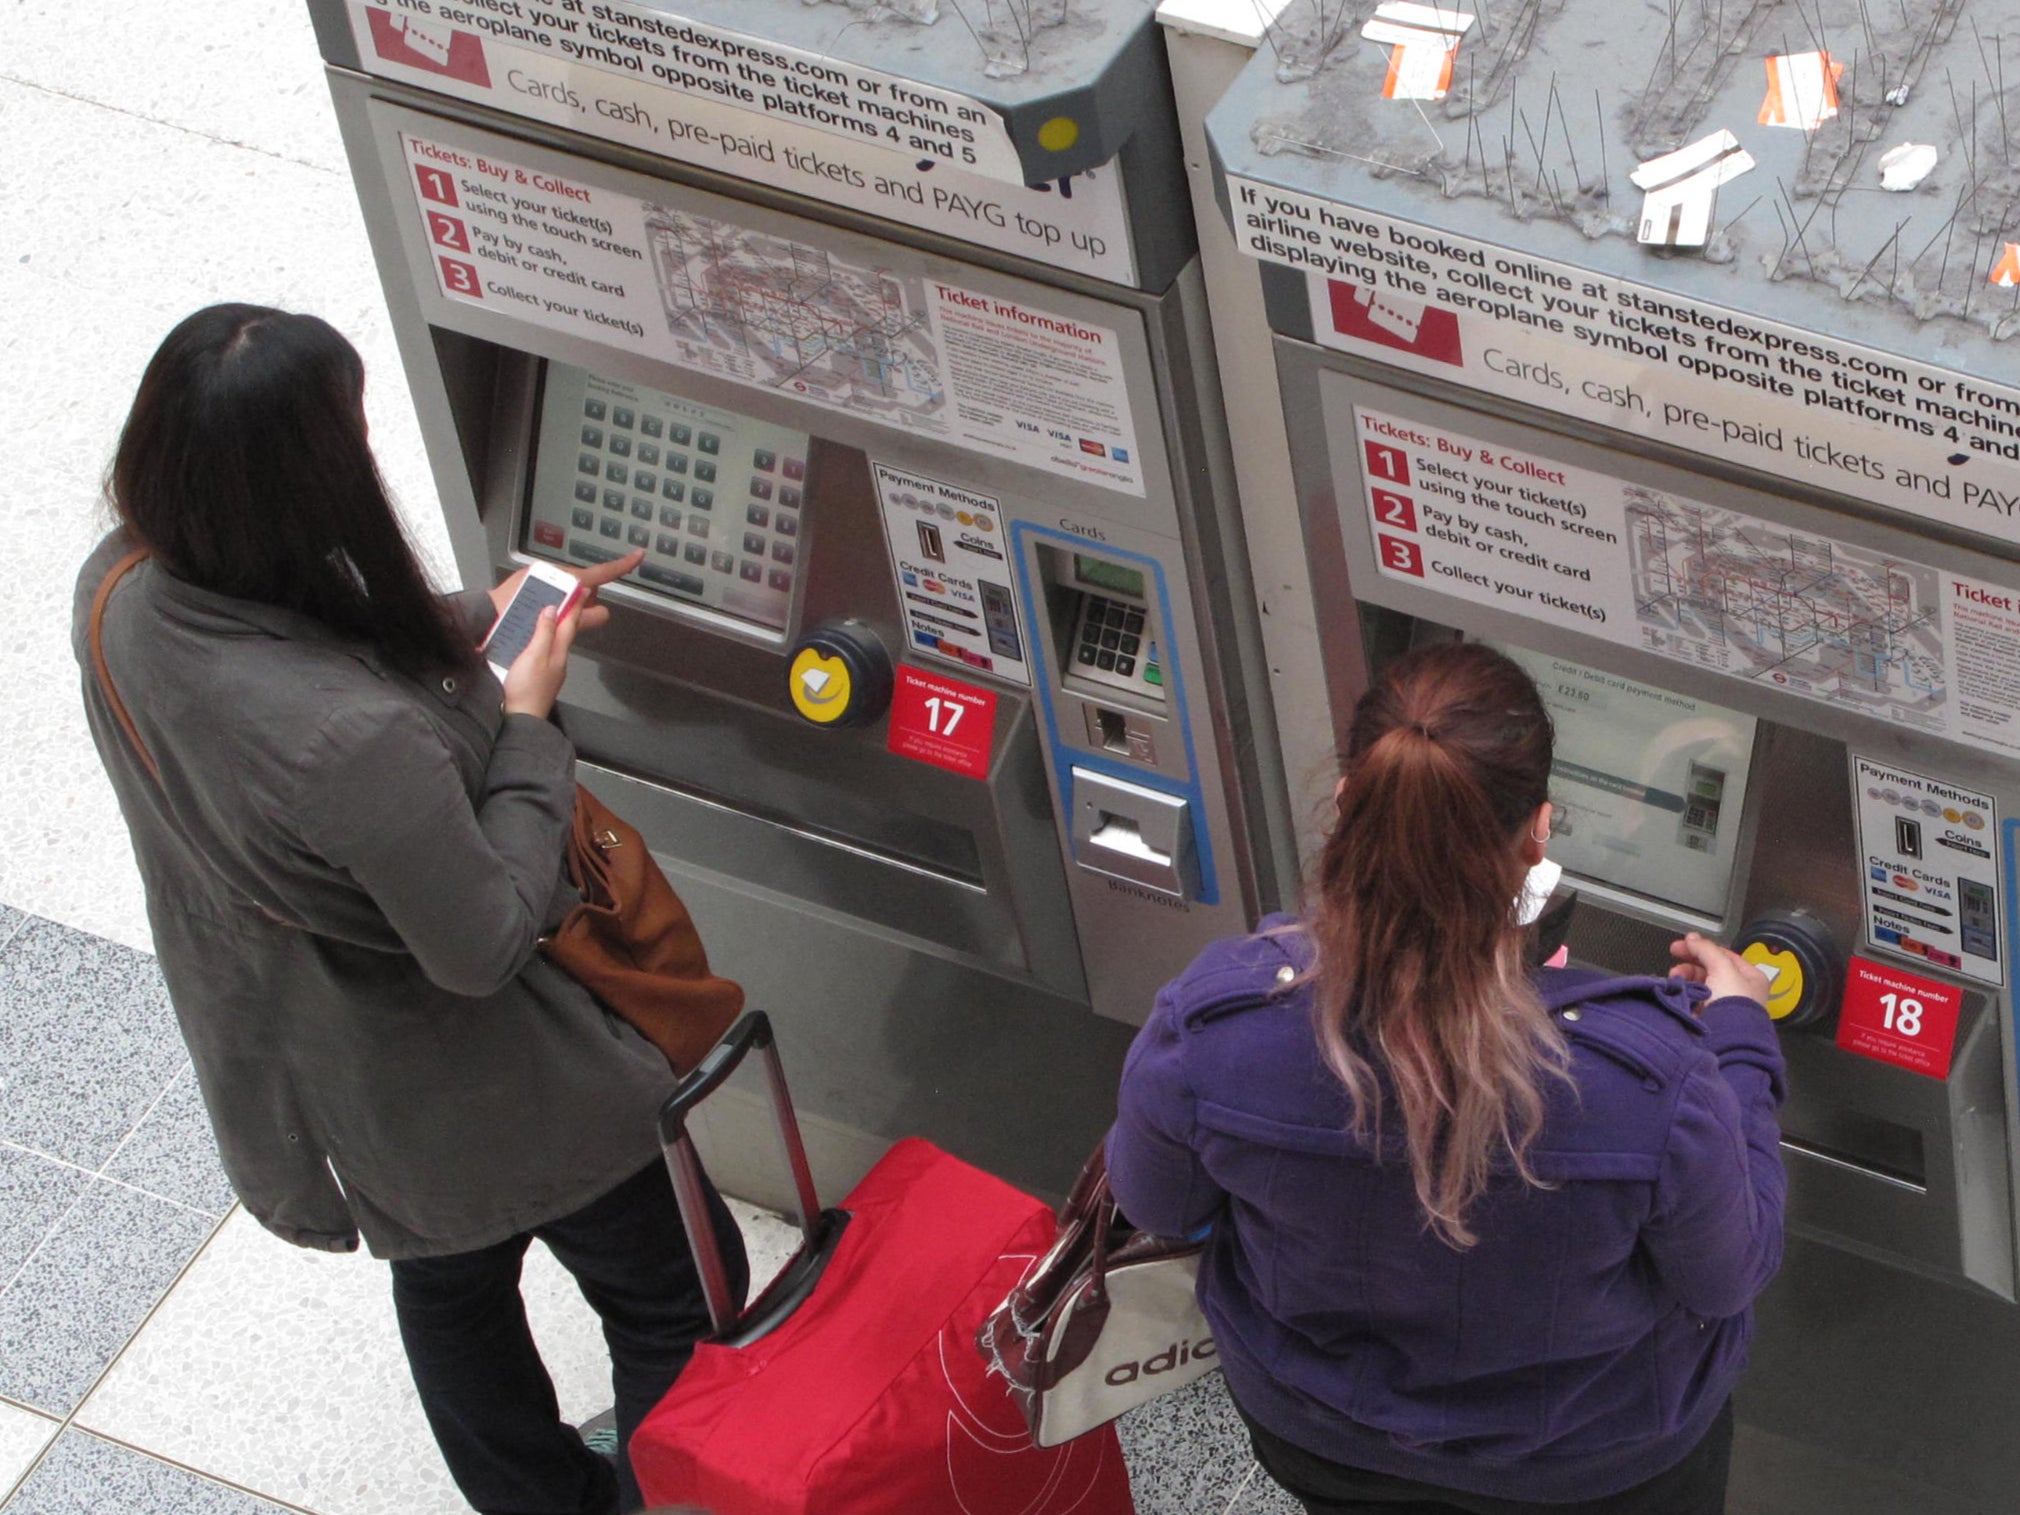 Price sensitive: passengers using ticket machines at a London station